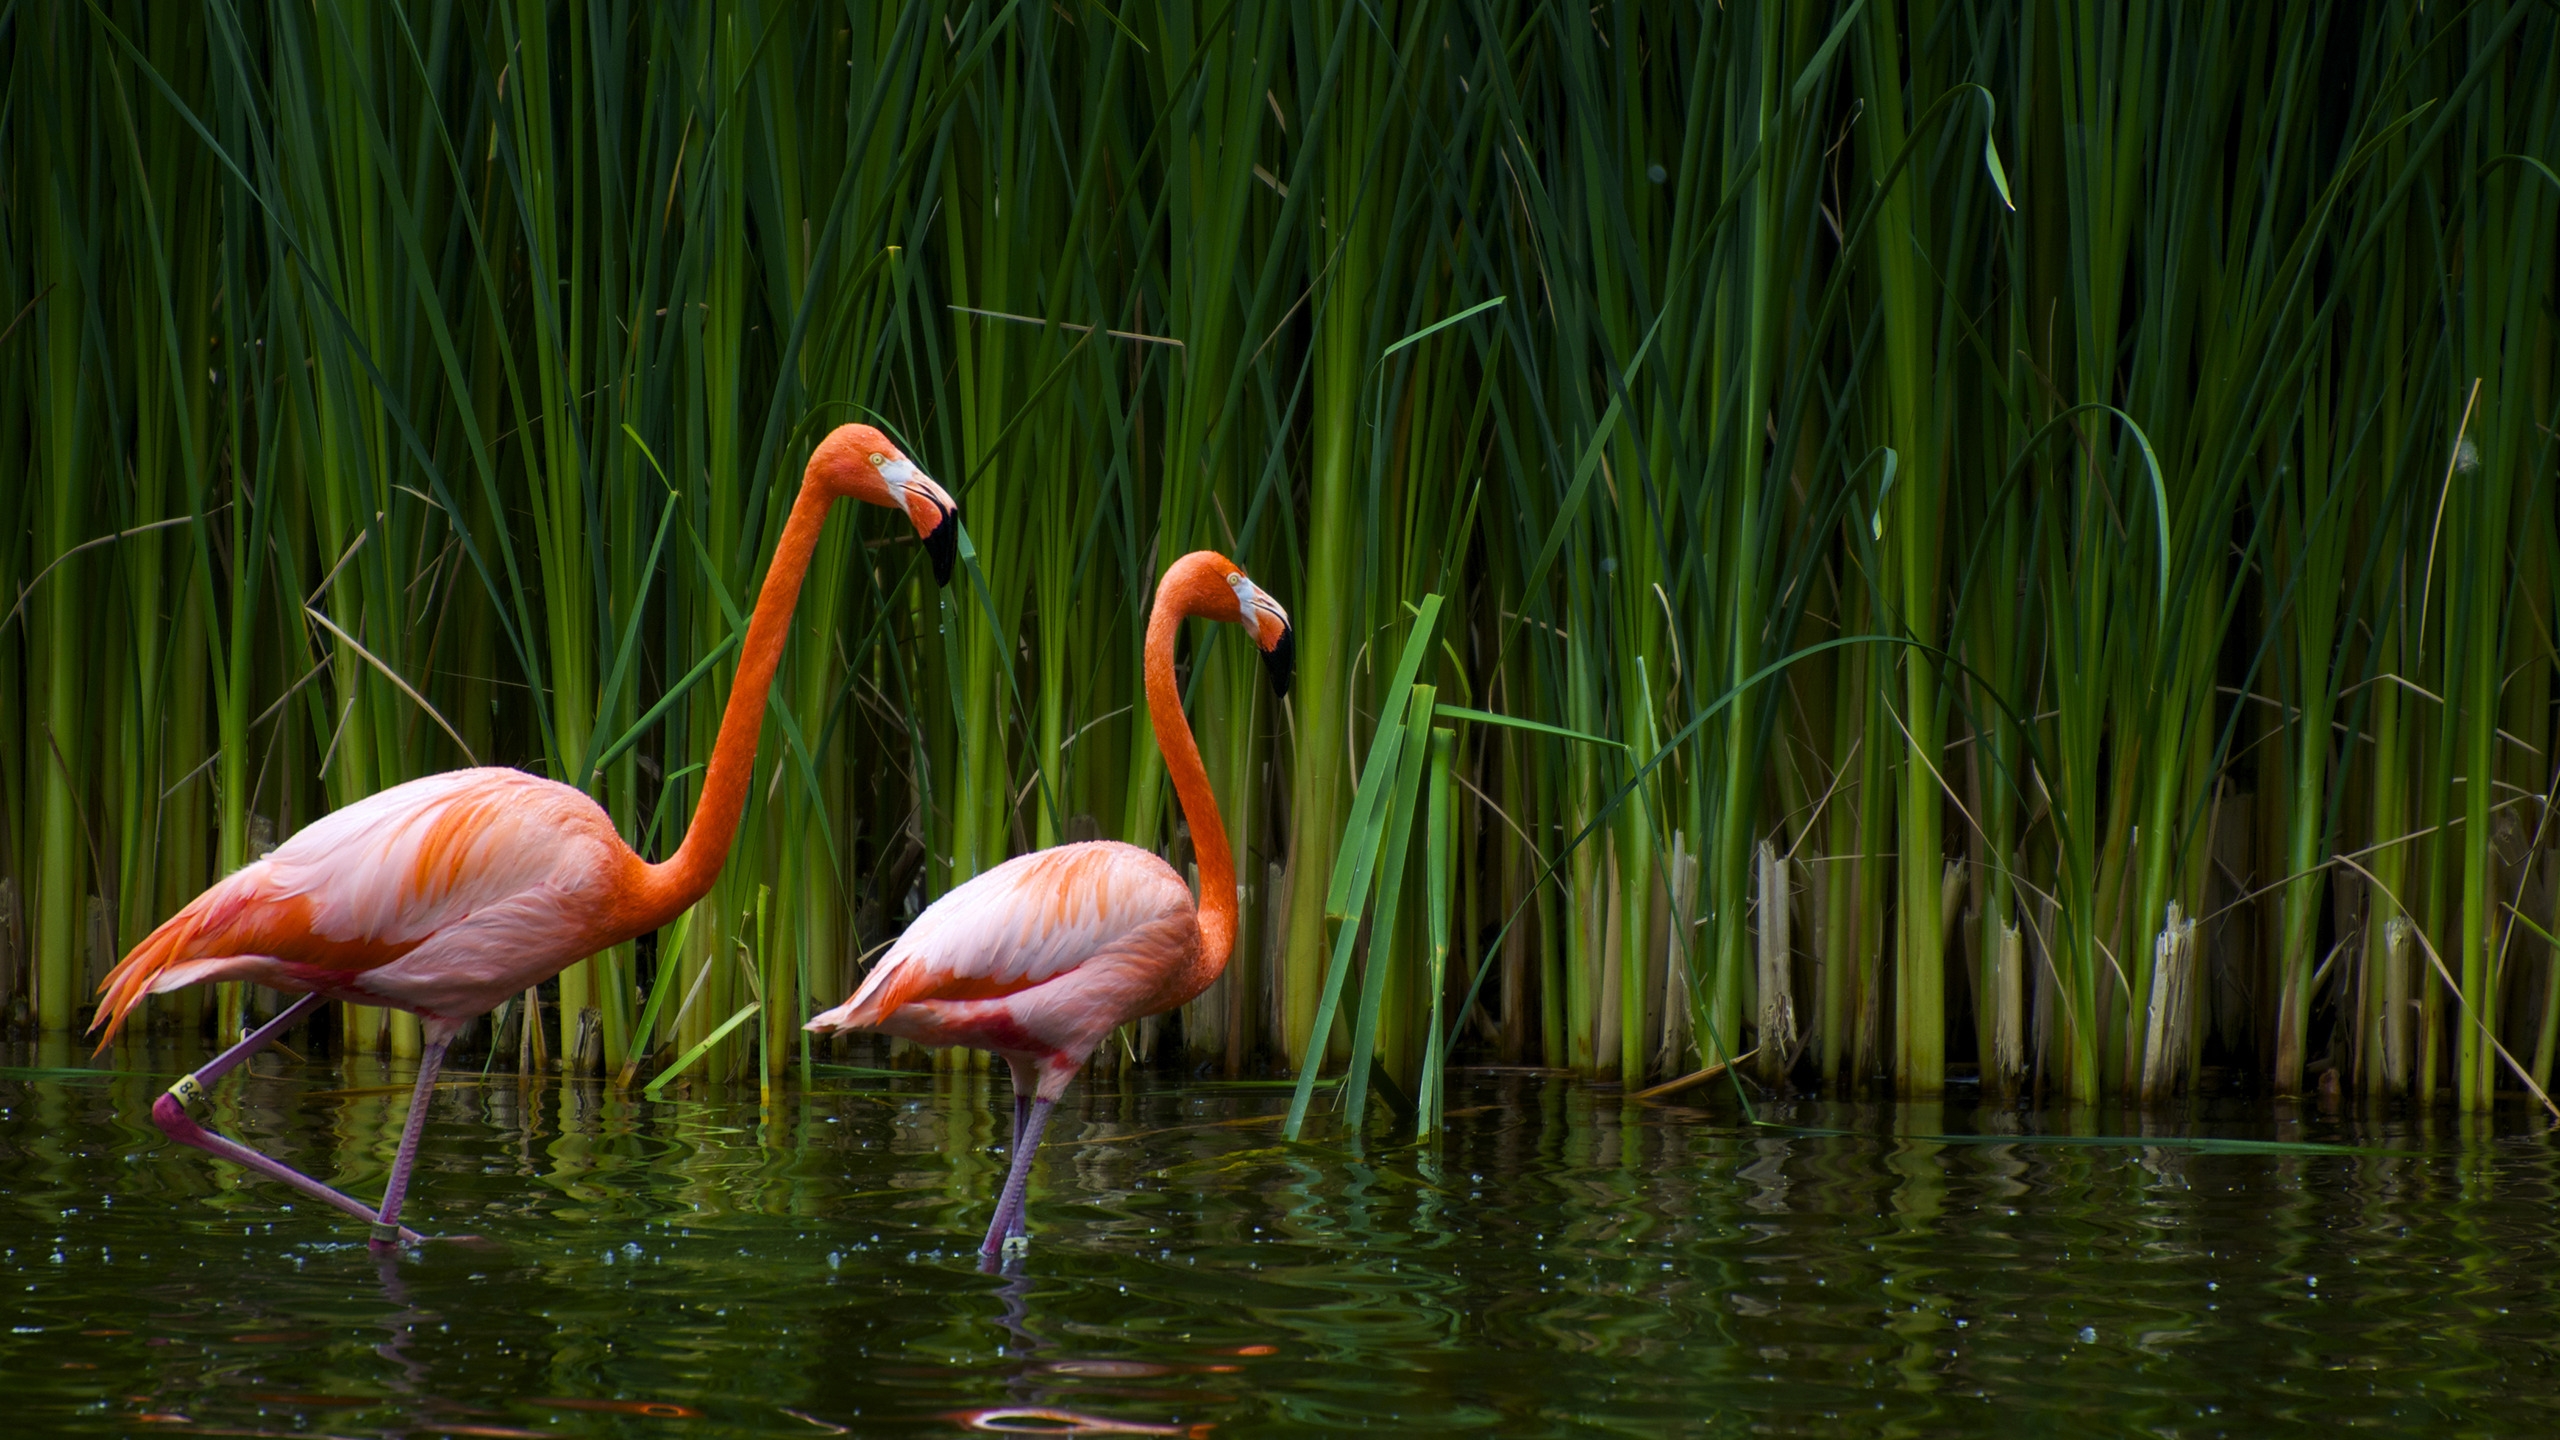 Pair of flamingos for 2560x1440 HDTV resolution